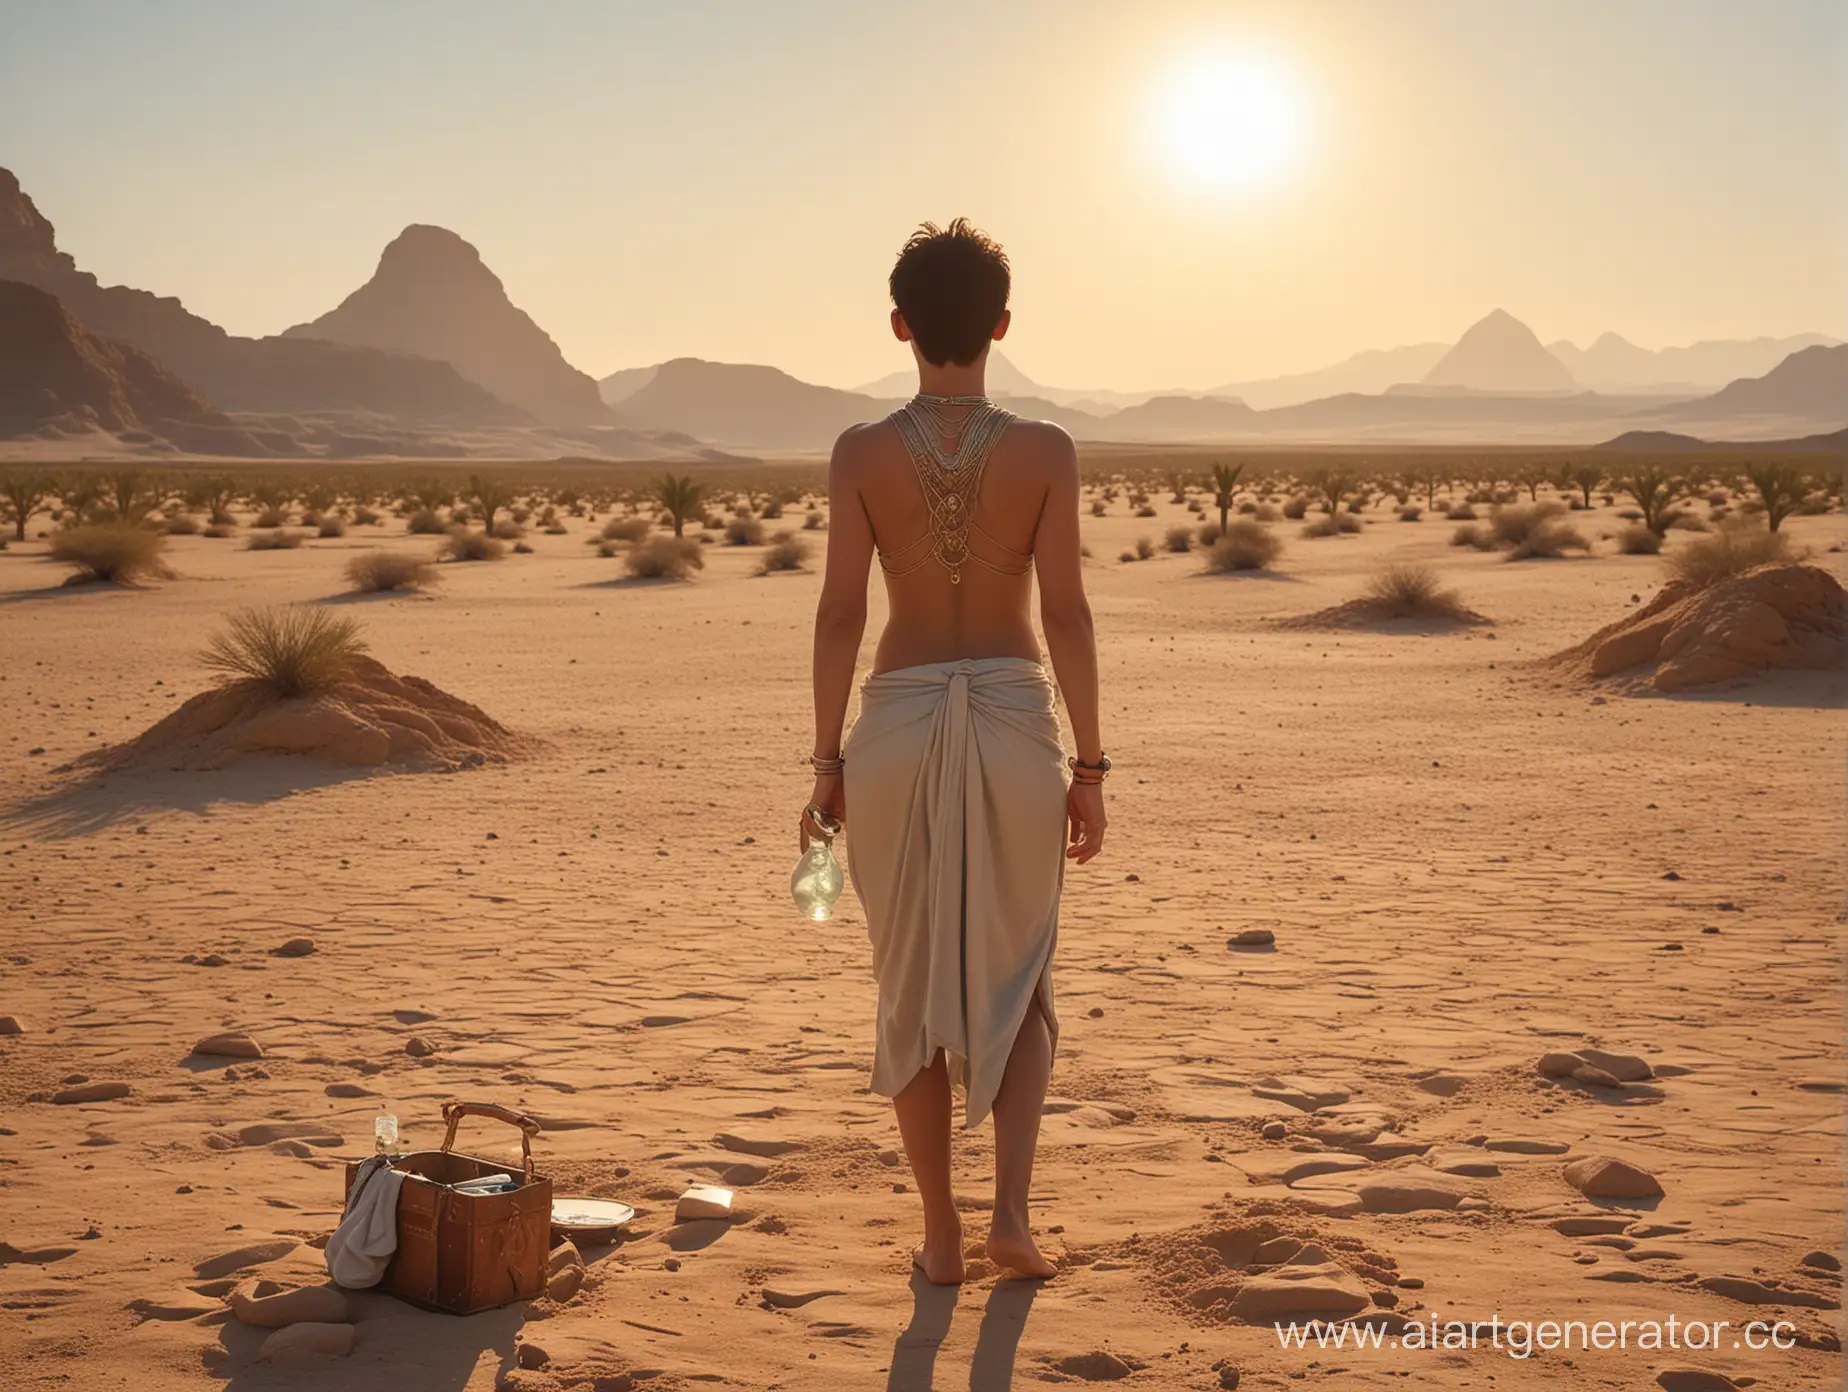 In the heart of the scorching desert, a lone traveler stumbles upon an otherworldly scene. He wears nothing but his underwear and clutches a bottle of martini. As the sun beats down mercilessly, he gazes at the horizon—a surreal mirage materializes before him. It’s Nefertiti, the ancient Egyptian queen, standing there in all her regal beauty. But is she real or a figment of his sun-addled mind?